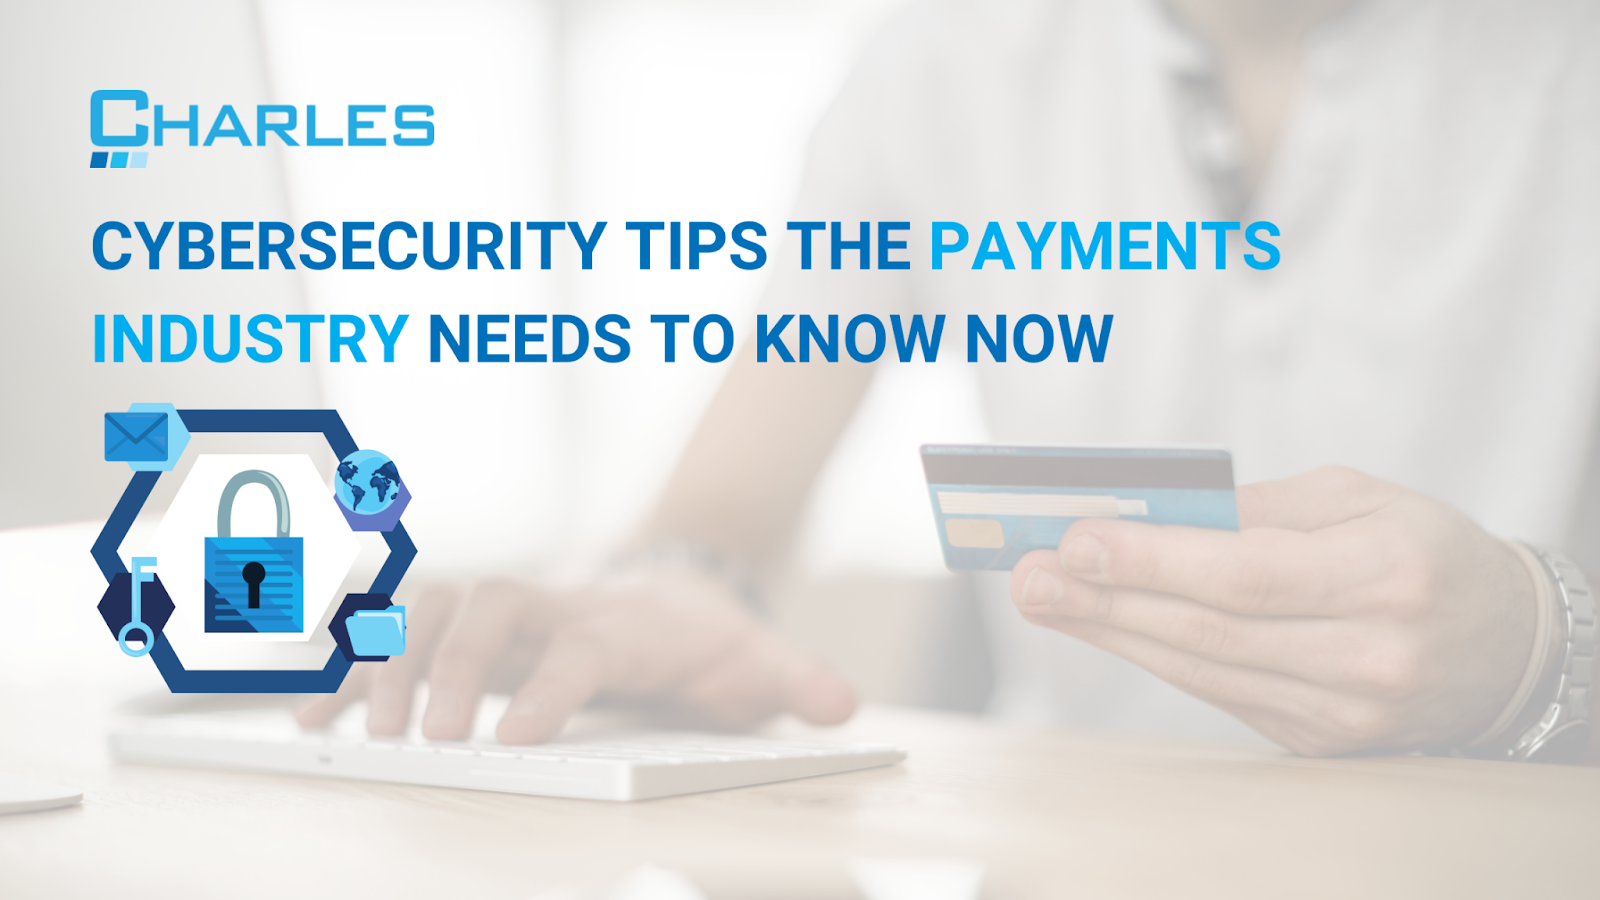 Cybersecurity Tips the Payments Industry Needs to Know Now